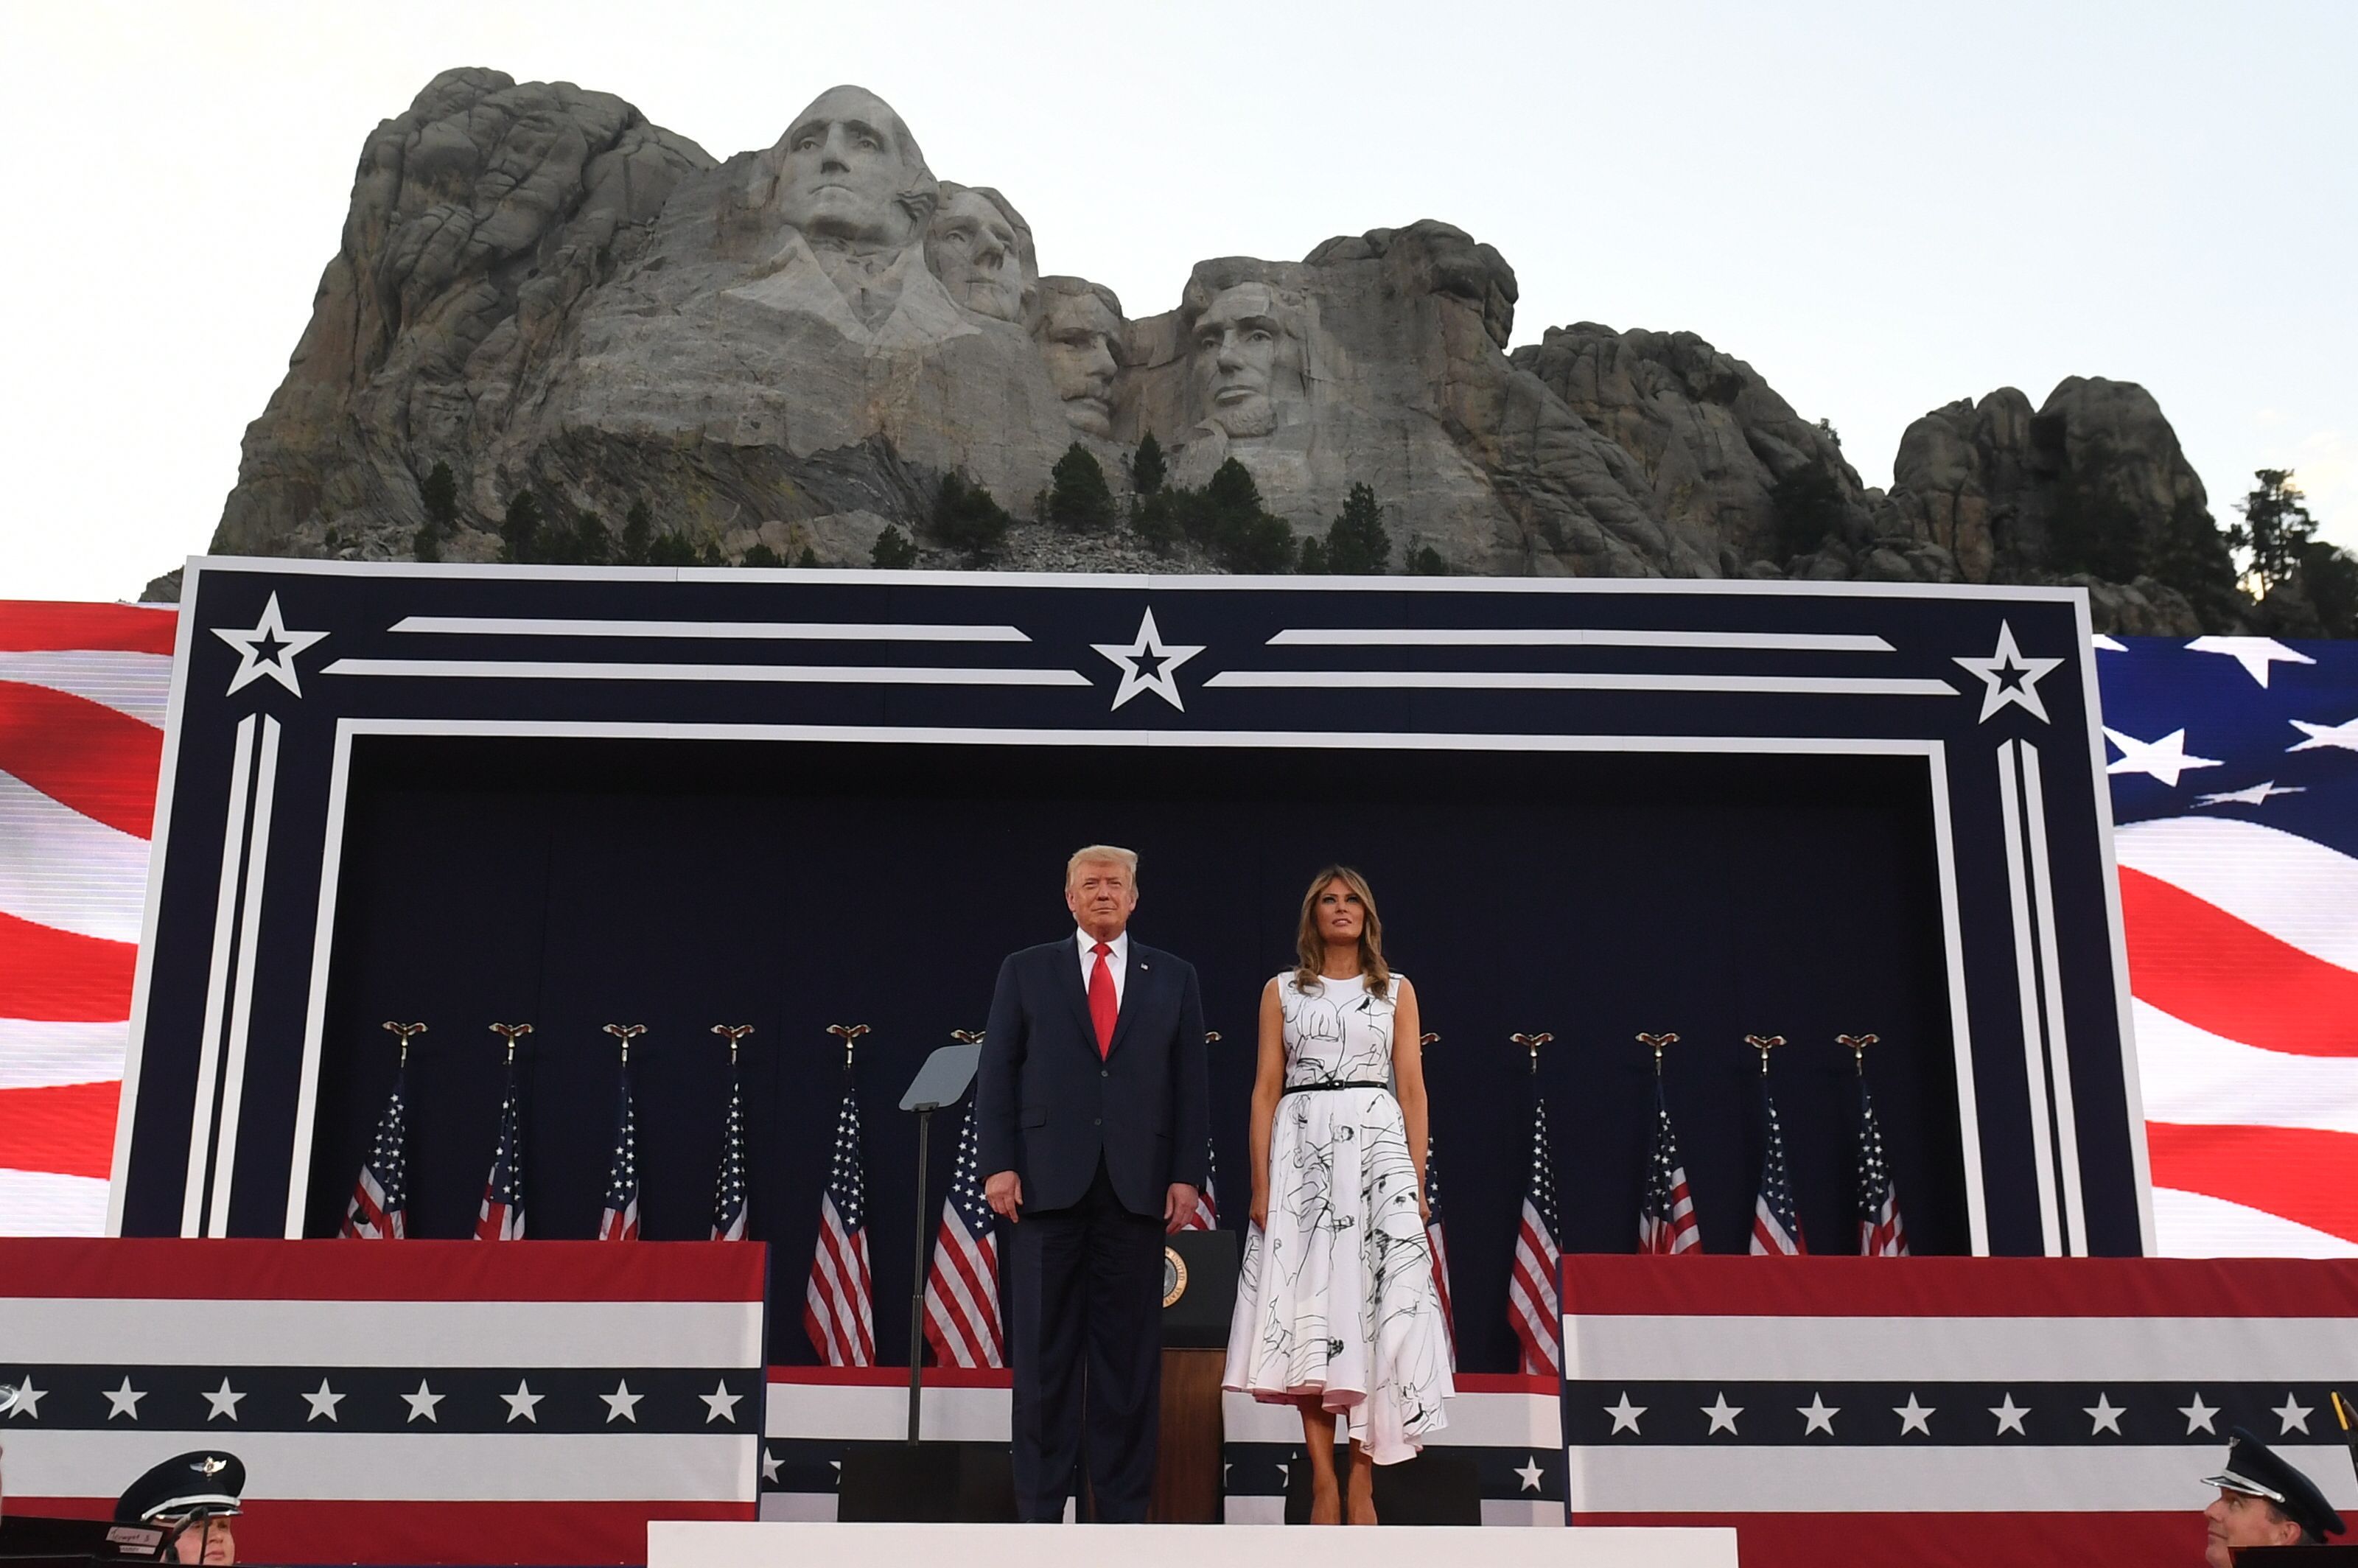 TOPSHOT - US President Donald Trump and First Lady Melania Trump attend Independence Day events at Mount Rushmore in Keystone, South Dakota, July 3, 2020. (Photo by SAUL LOEB / AFP) (Photo by SAUL LOEB/AFP via Getty Images)